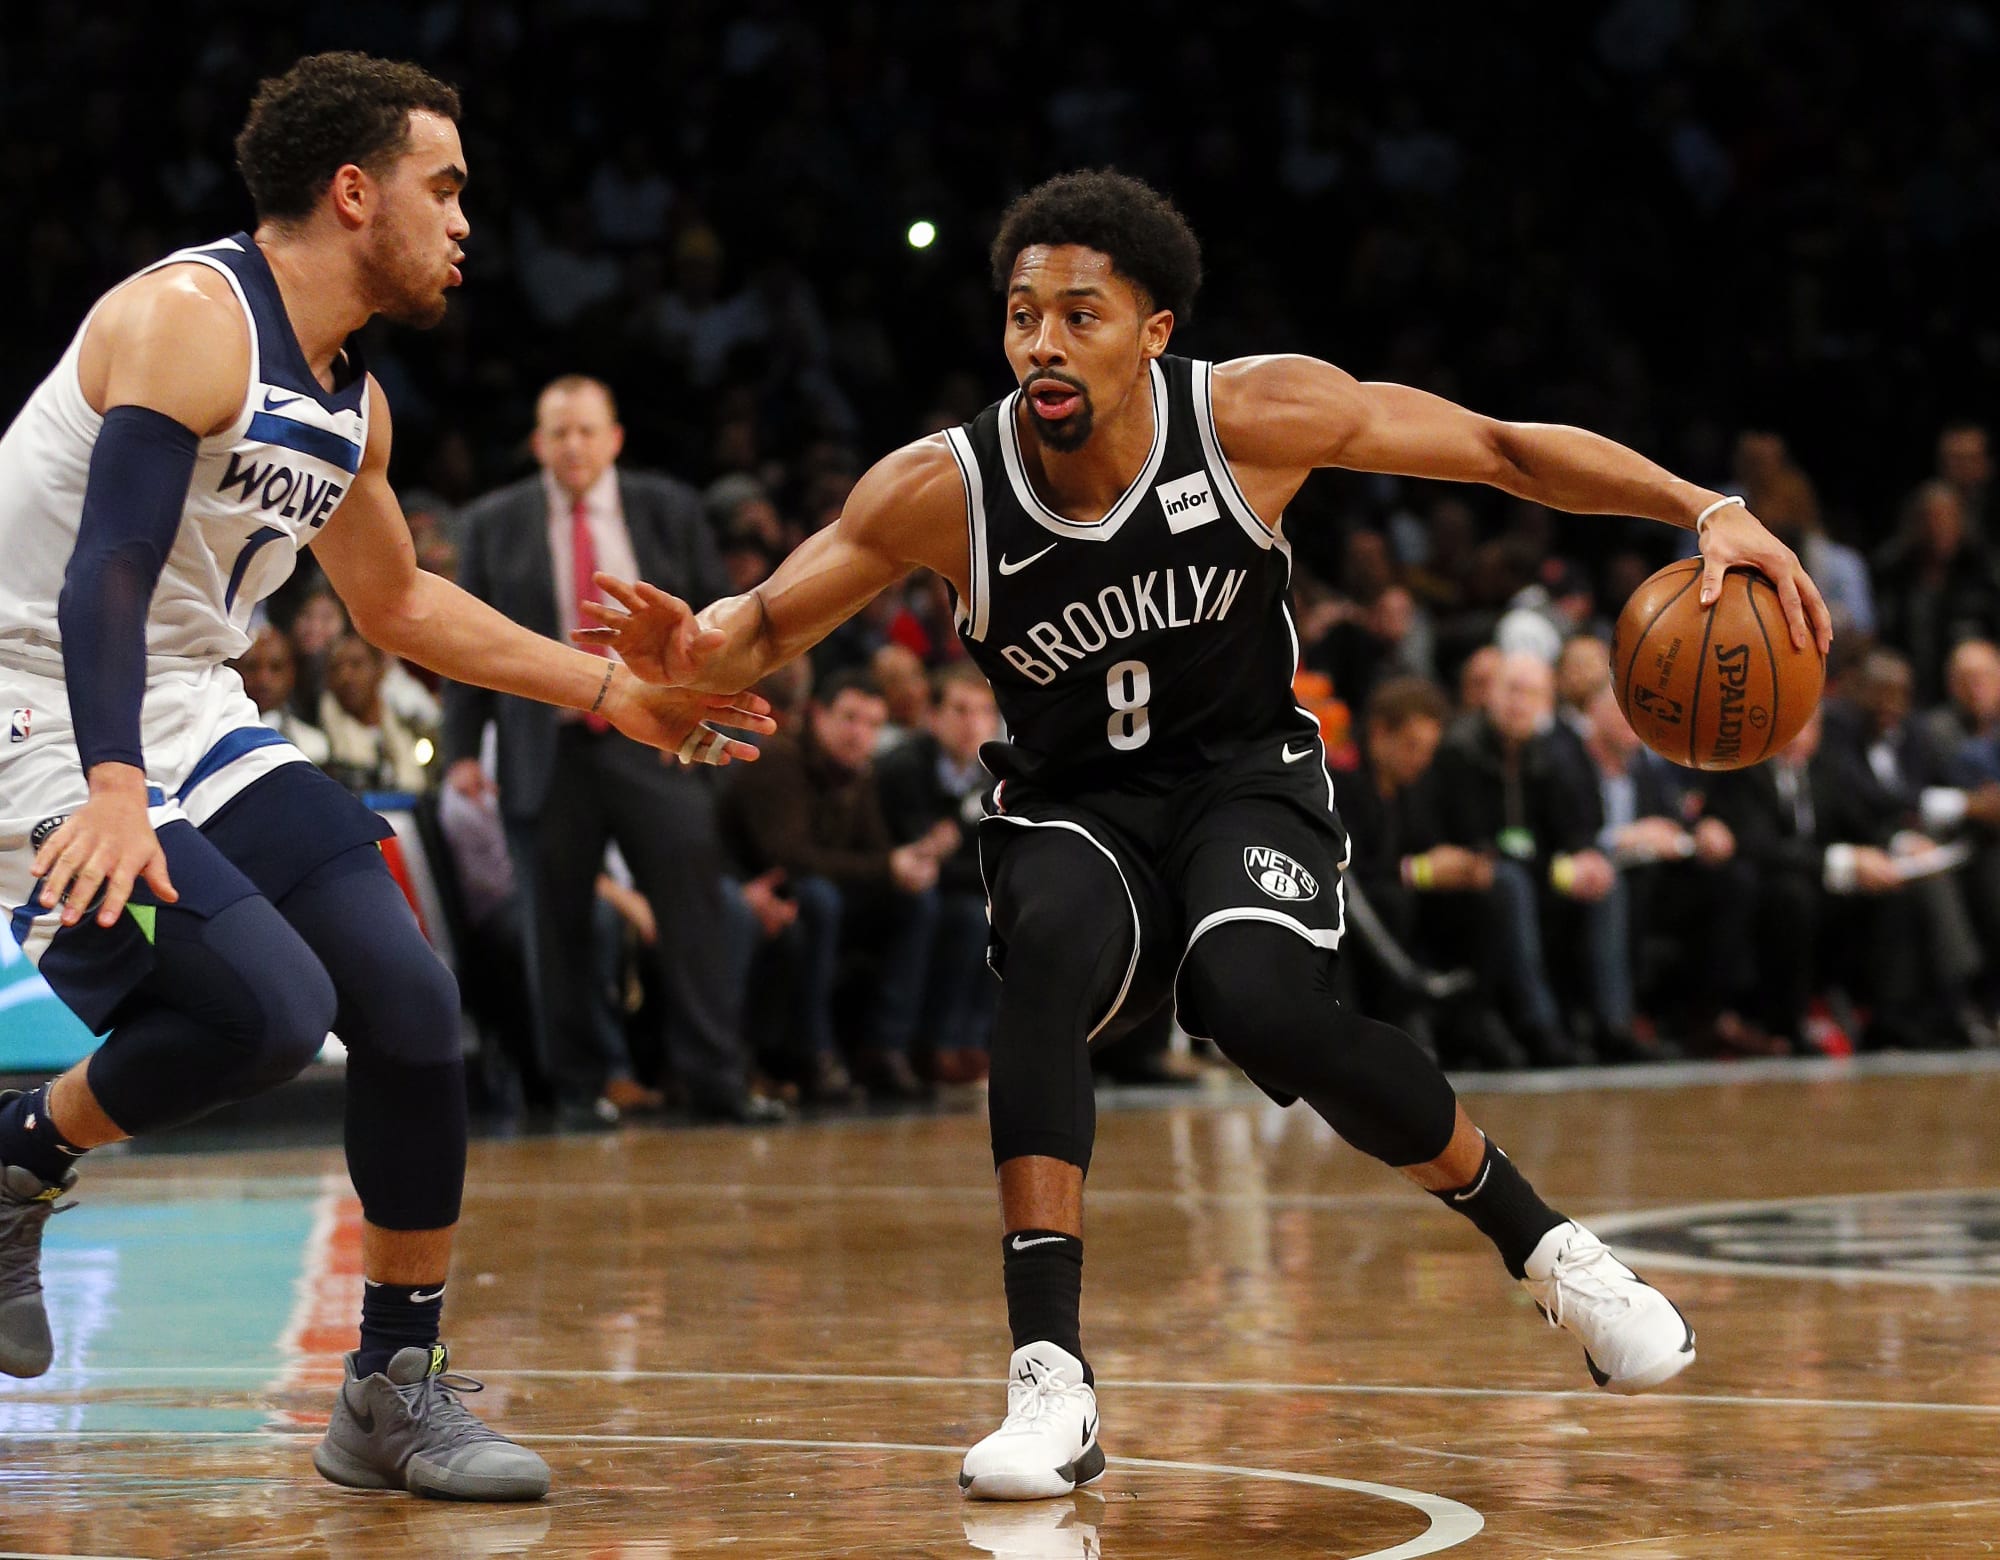 What To Watch For Minnesota Timberwolves vs. Brooklyn Nets